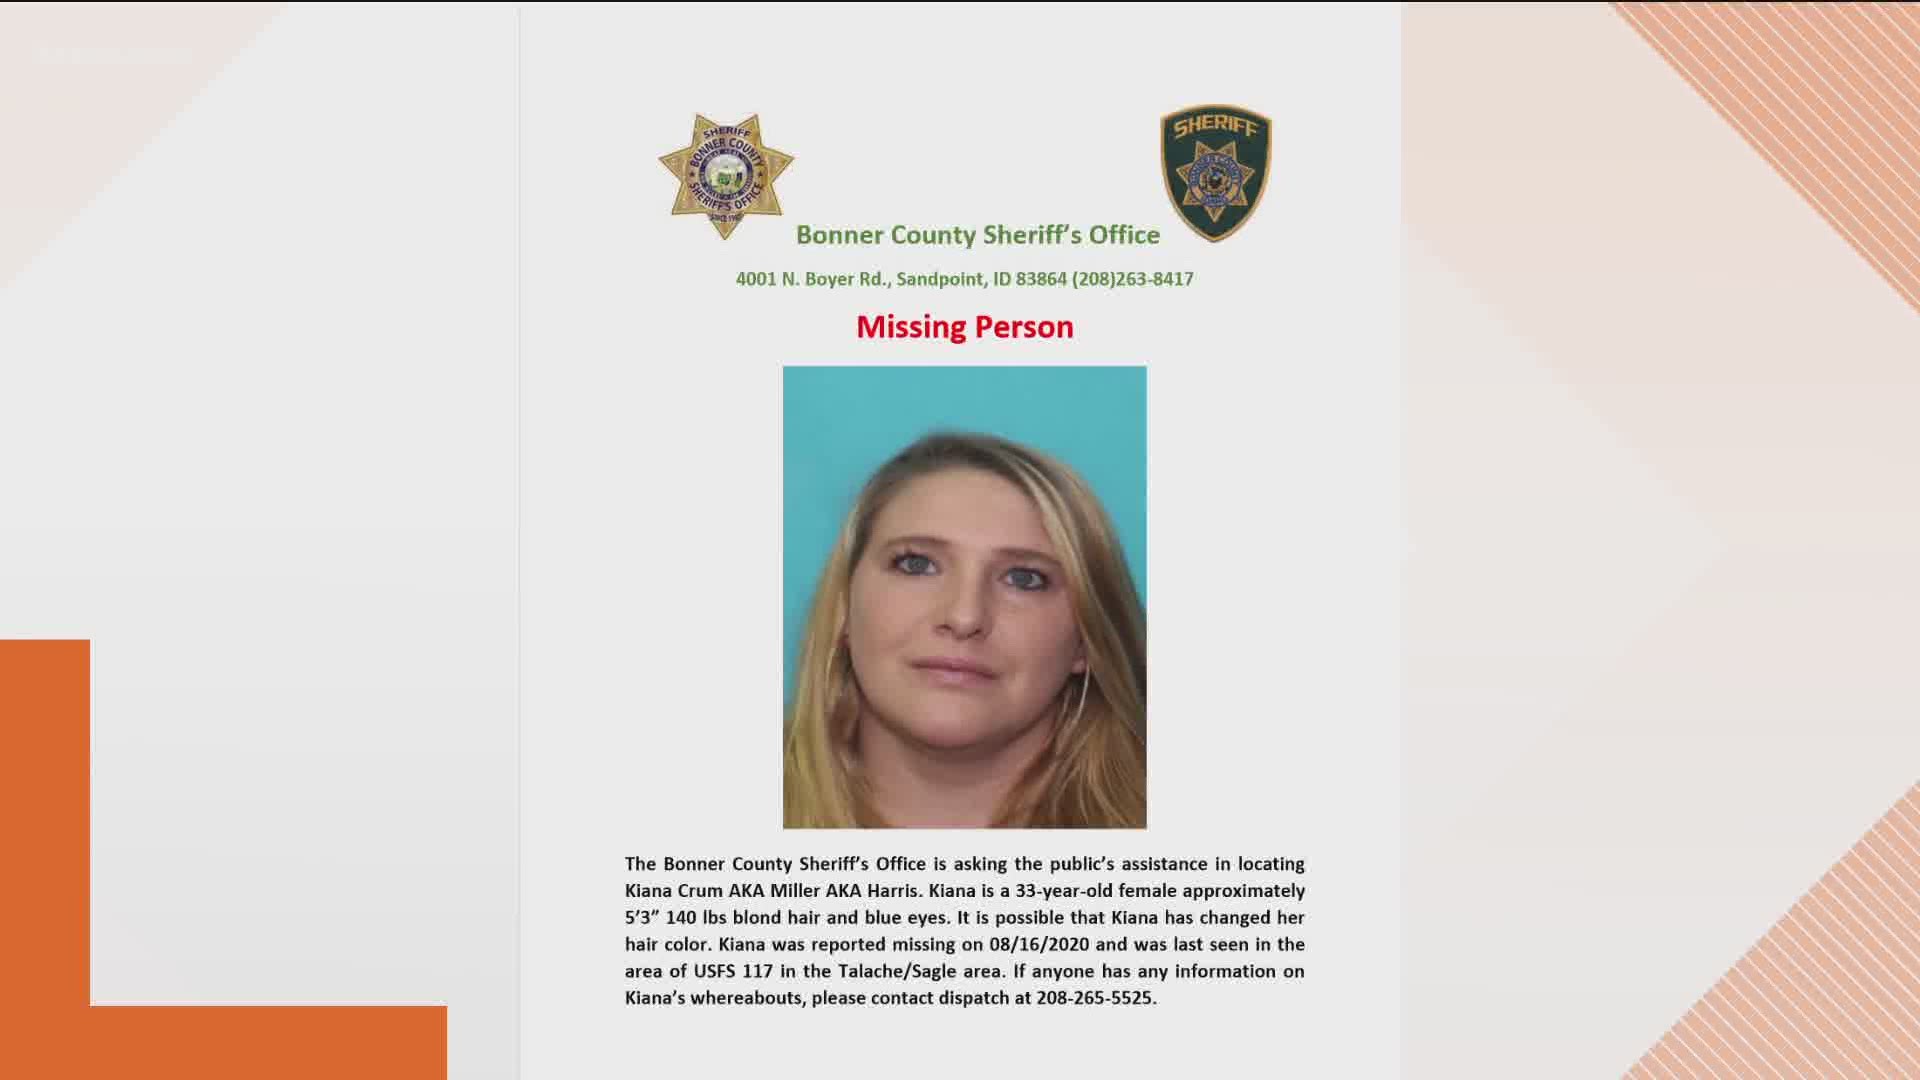 A motorcyclist found Kiana Crum and her dog walking in the woods above Mirror Lake on Thursday, according to the Bonner County Sheriff's Office.